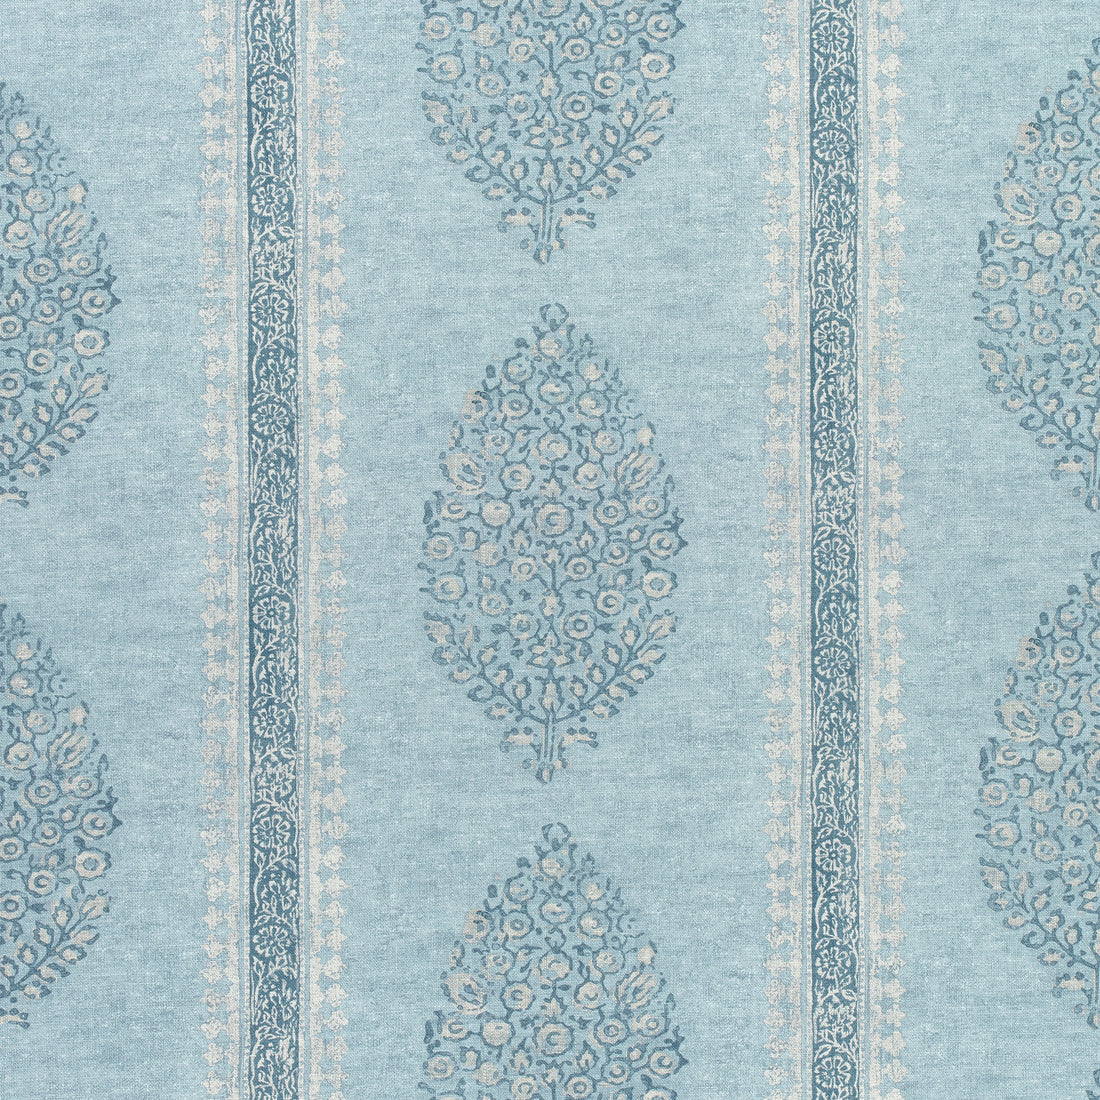 Chappana fabric in slate blue color - pattern number F910235 - by Thibaut in the Colony collection